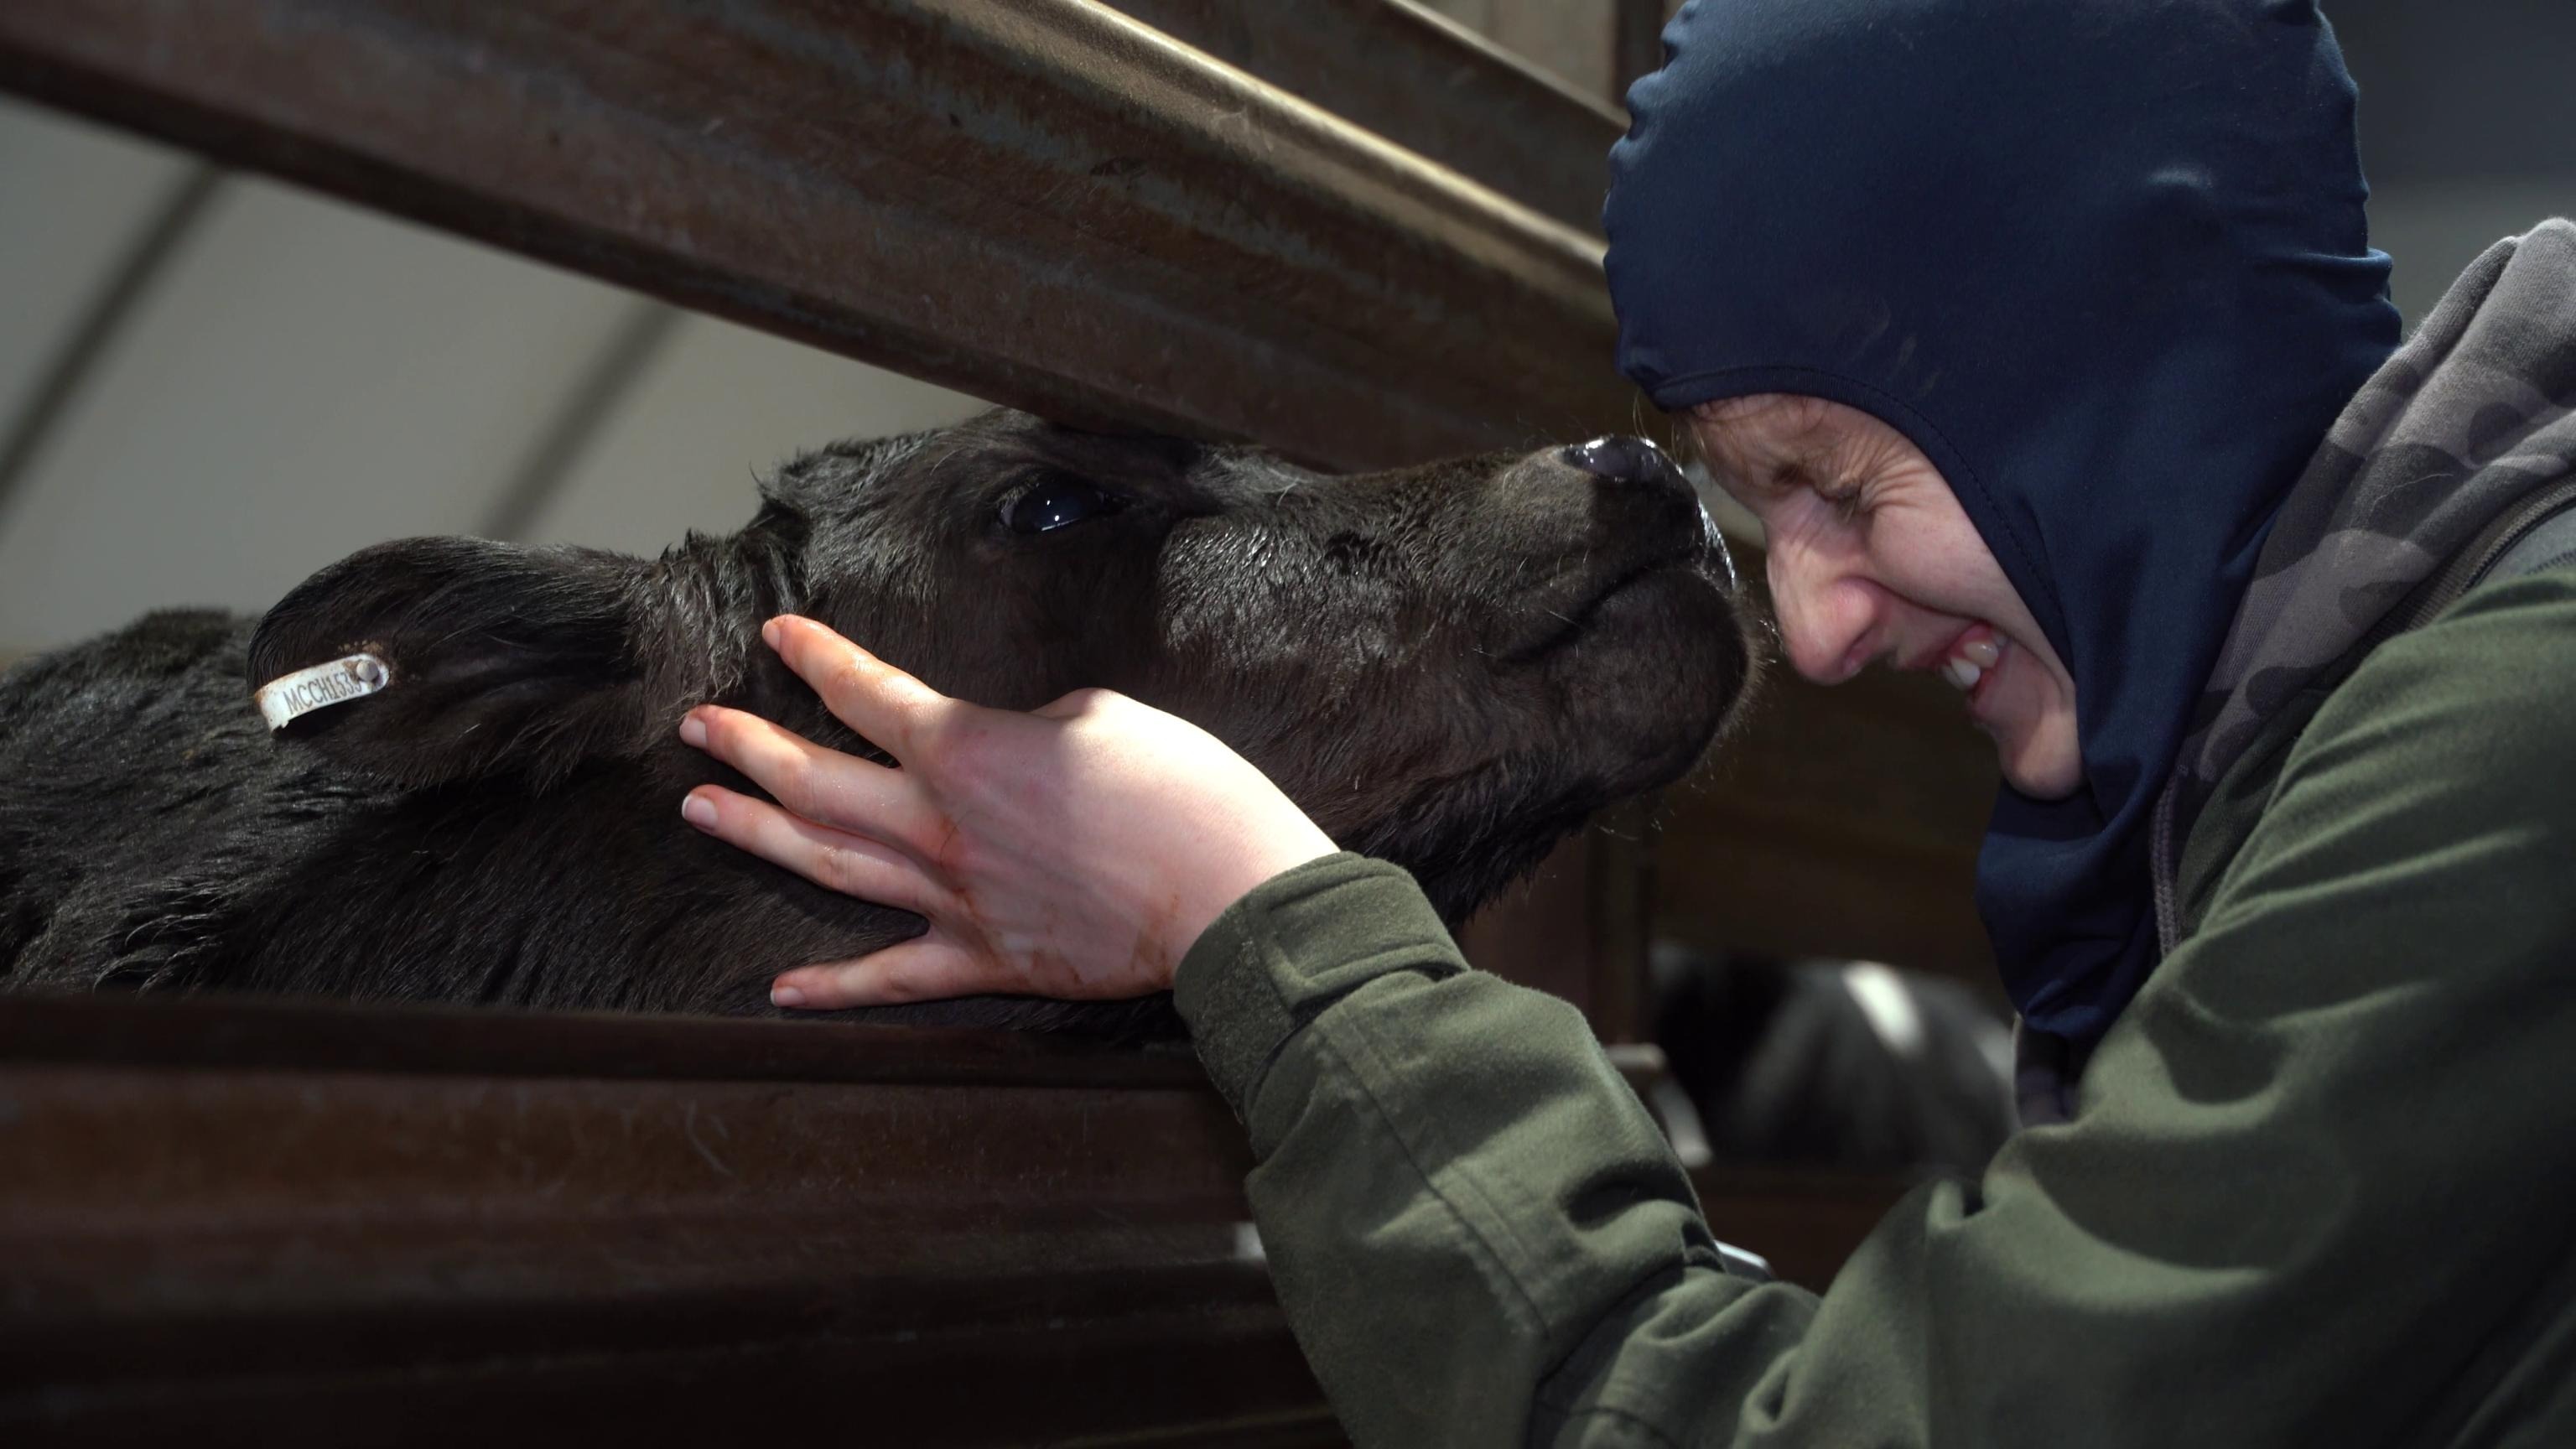 An activist shows affection to a dairy calf awaiting slaughter in the holding pens of a Tasmanian slaughterhouse